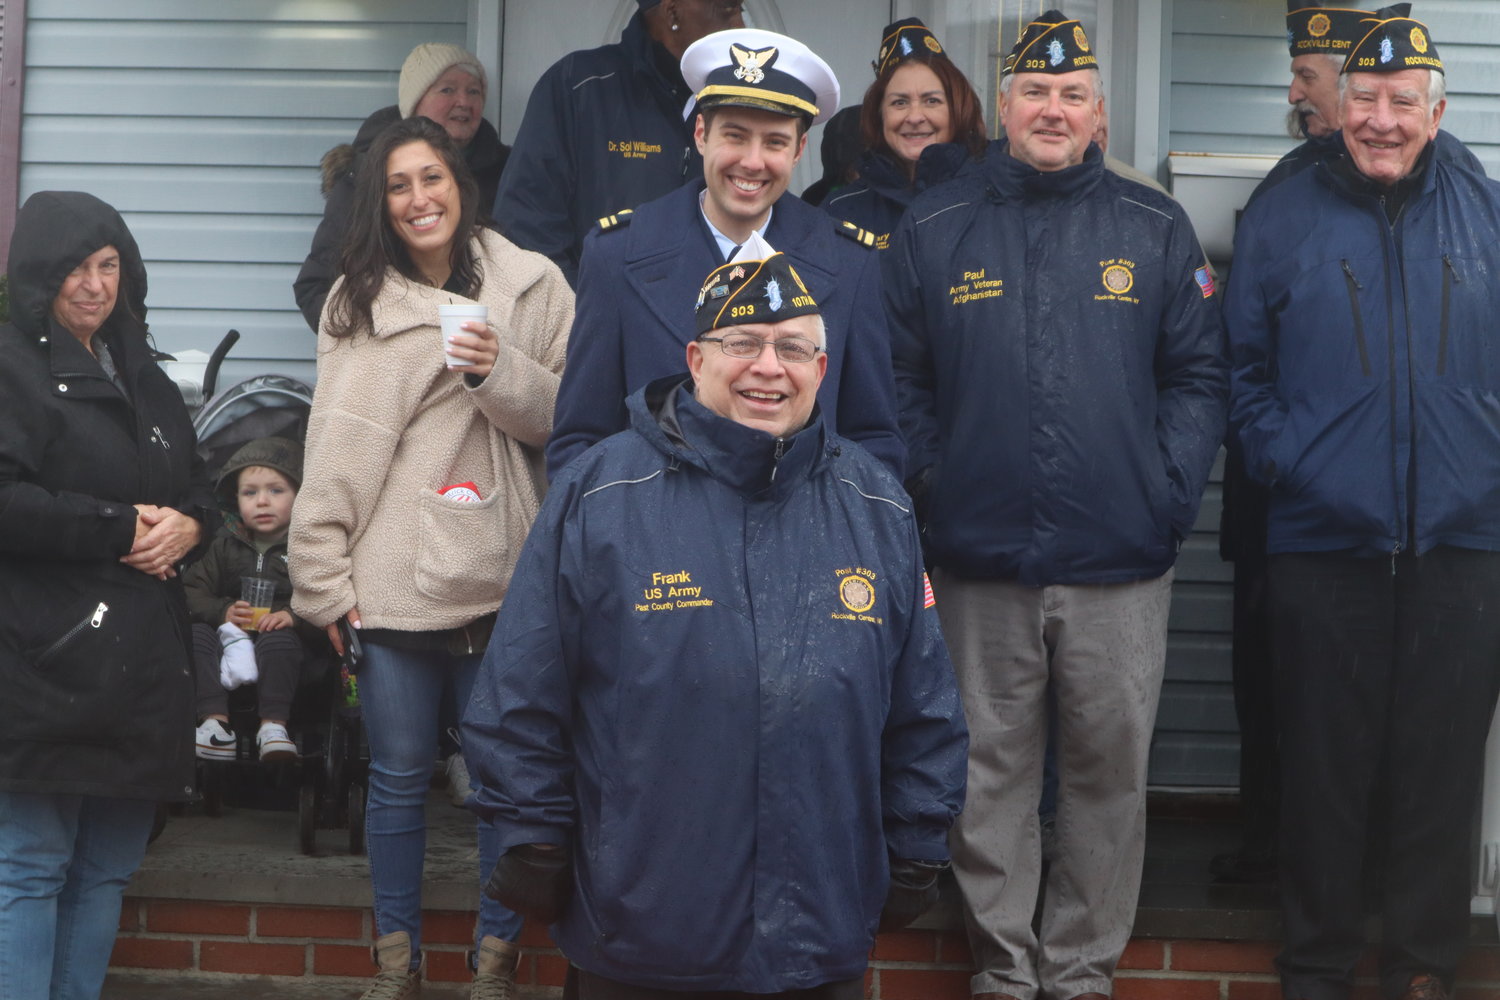 Members of American Legion Post 303 watched and participated in the parade as it proceeded down Maple Avenue towards the staging area across from the Cathedral.